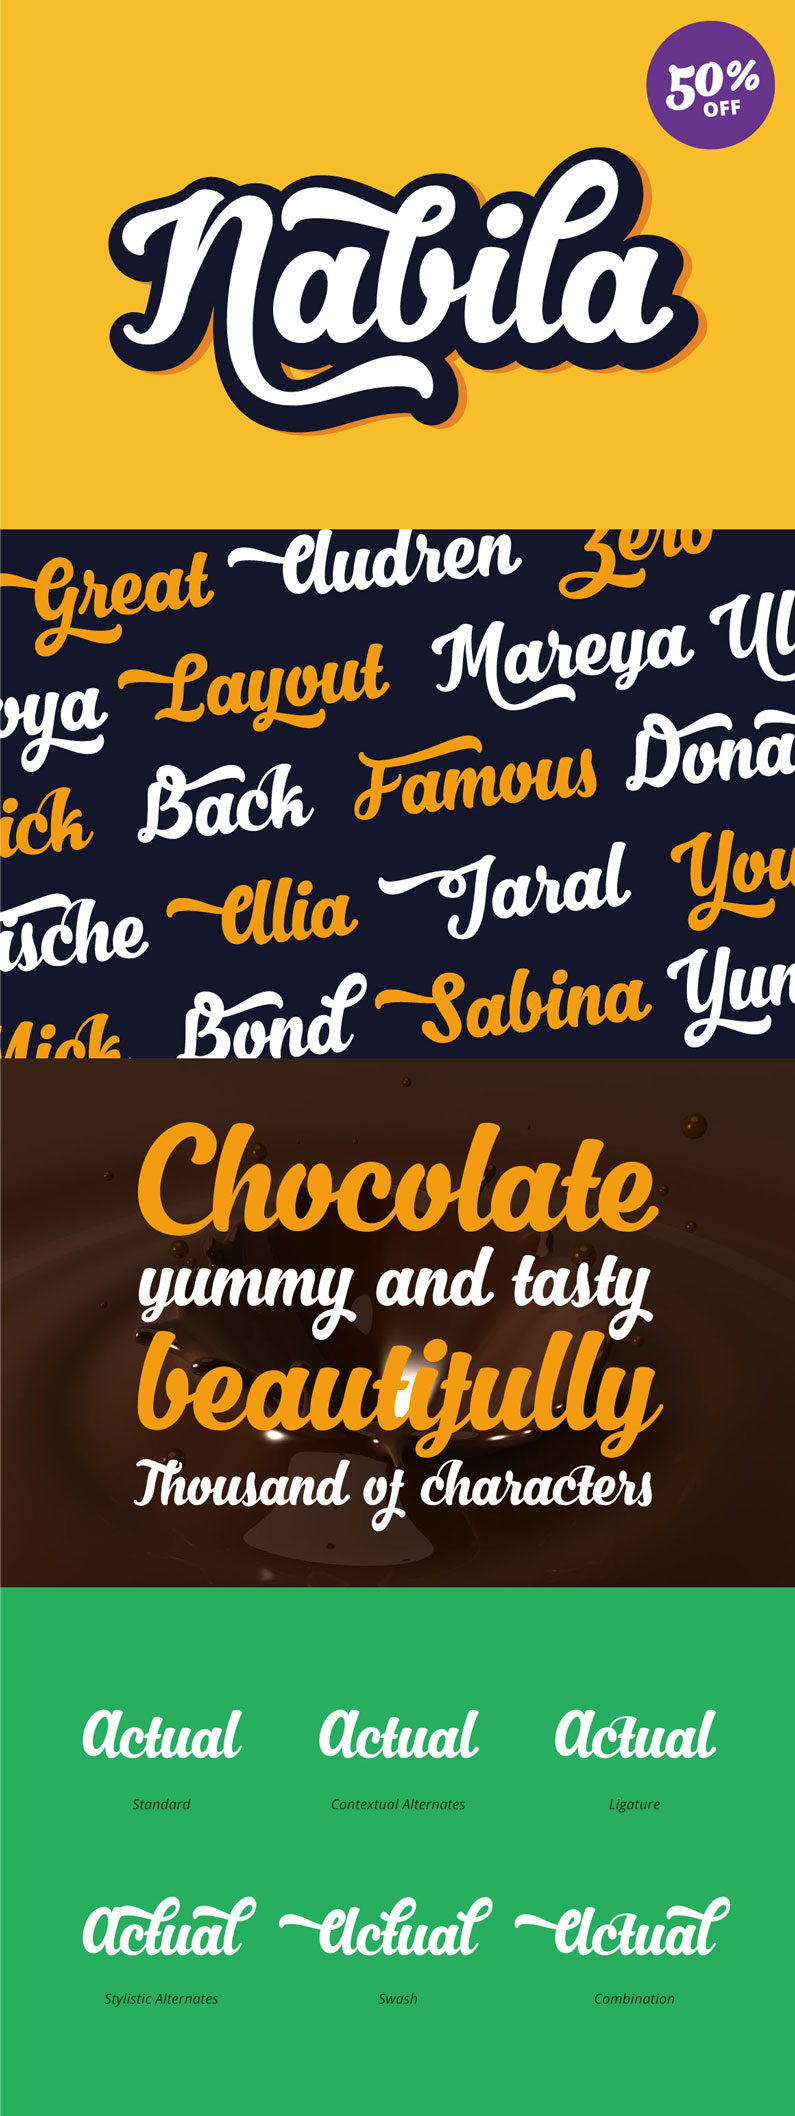 Nabila is bold, playful, modern, and multi-purpose typeface that combines brush lettering with natural handwriting. It is suitable for logos, packaging, headlines, posters, t-shirts, etc.